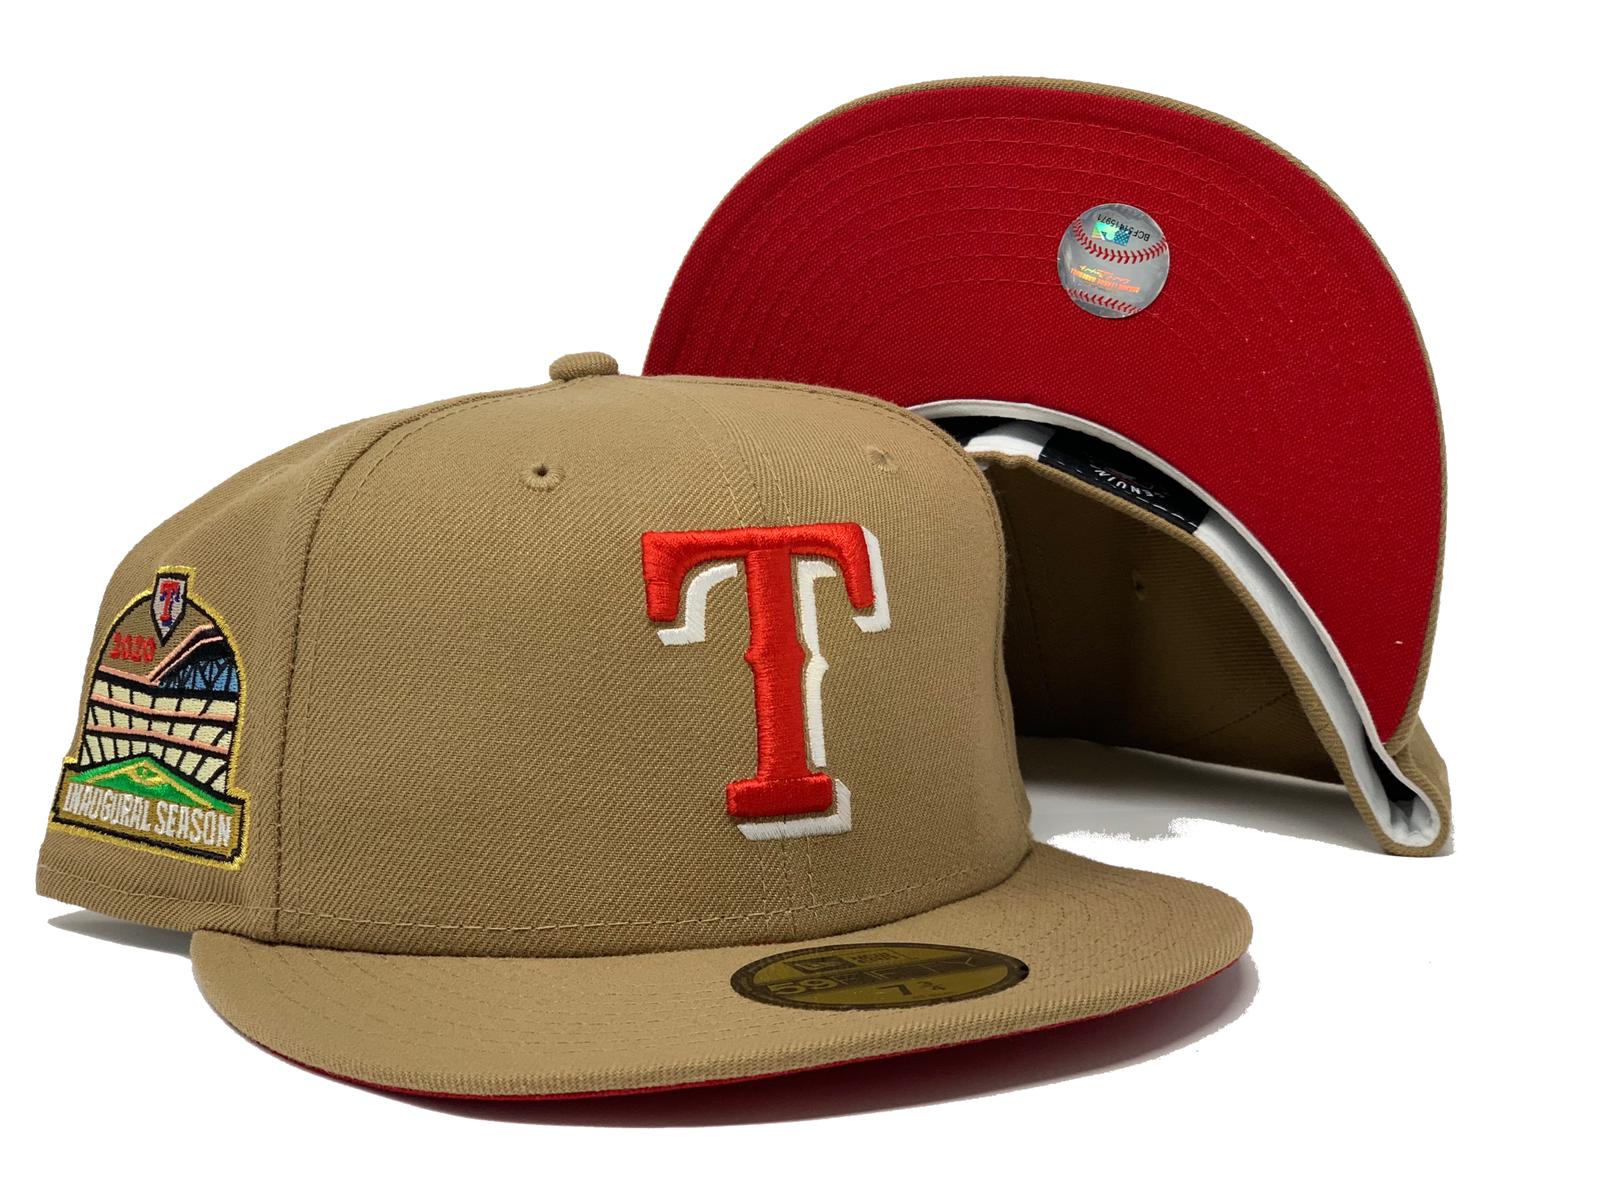 New Era Texas Rangers Fitted Hat Two-Tone Cream/Red Sz 7 3/8 (#9859)